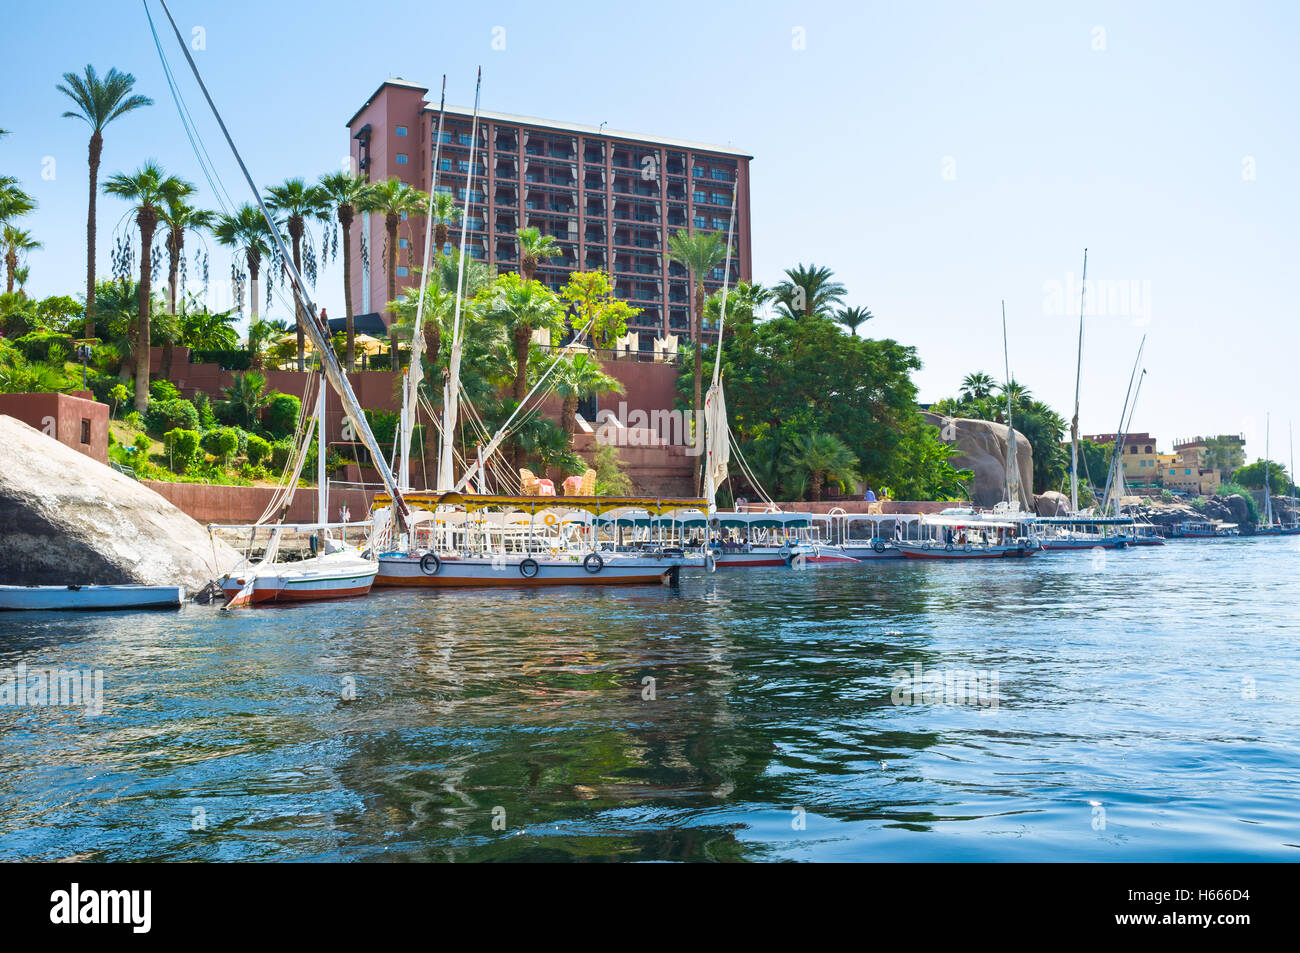 The luxury hotel on the Nile promenade with the numerous boats and feluccas, moored at wharf, Aswan, Egypt. Stock Photo